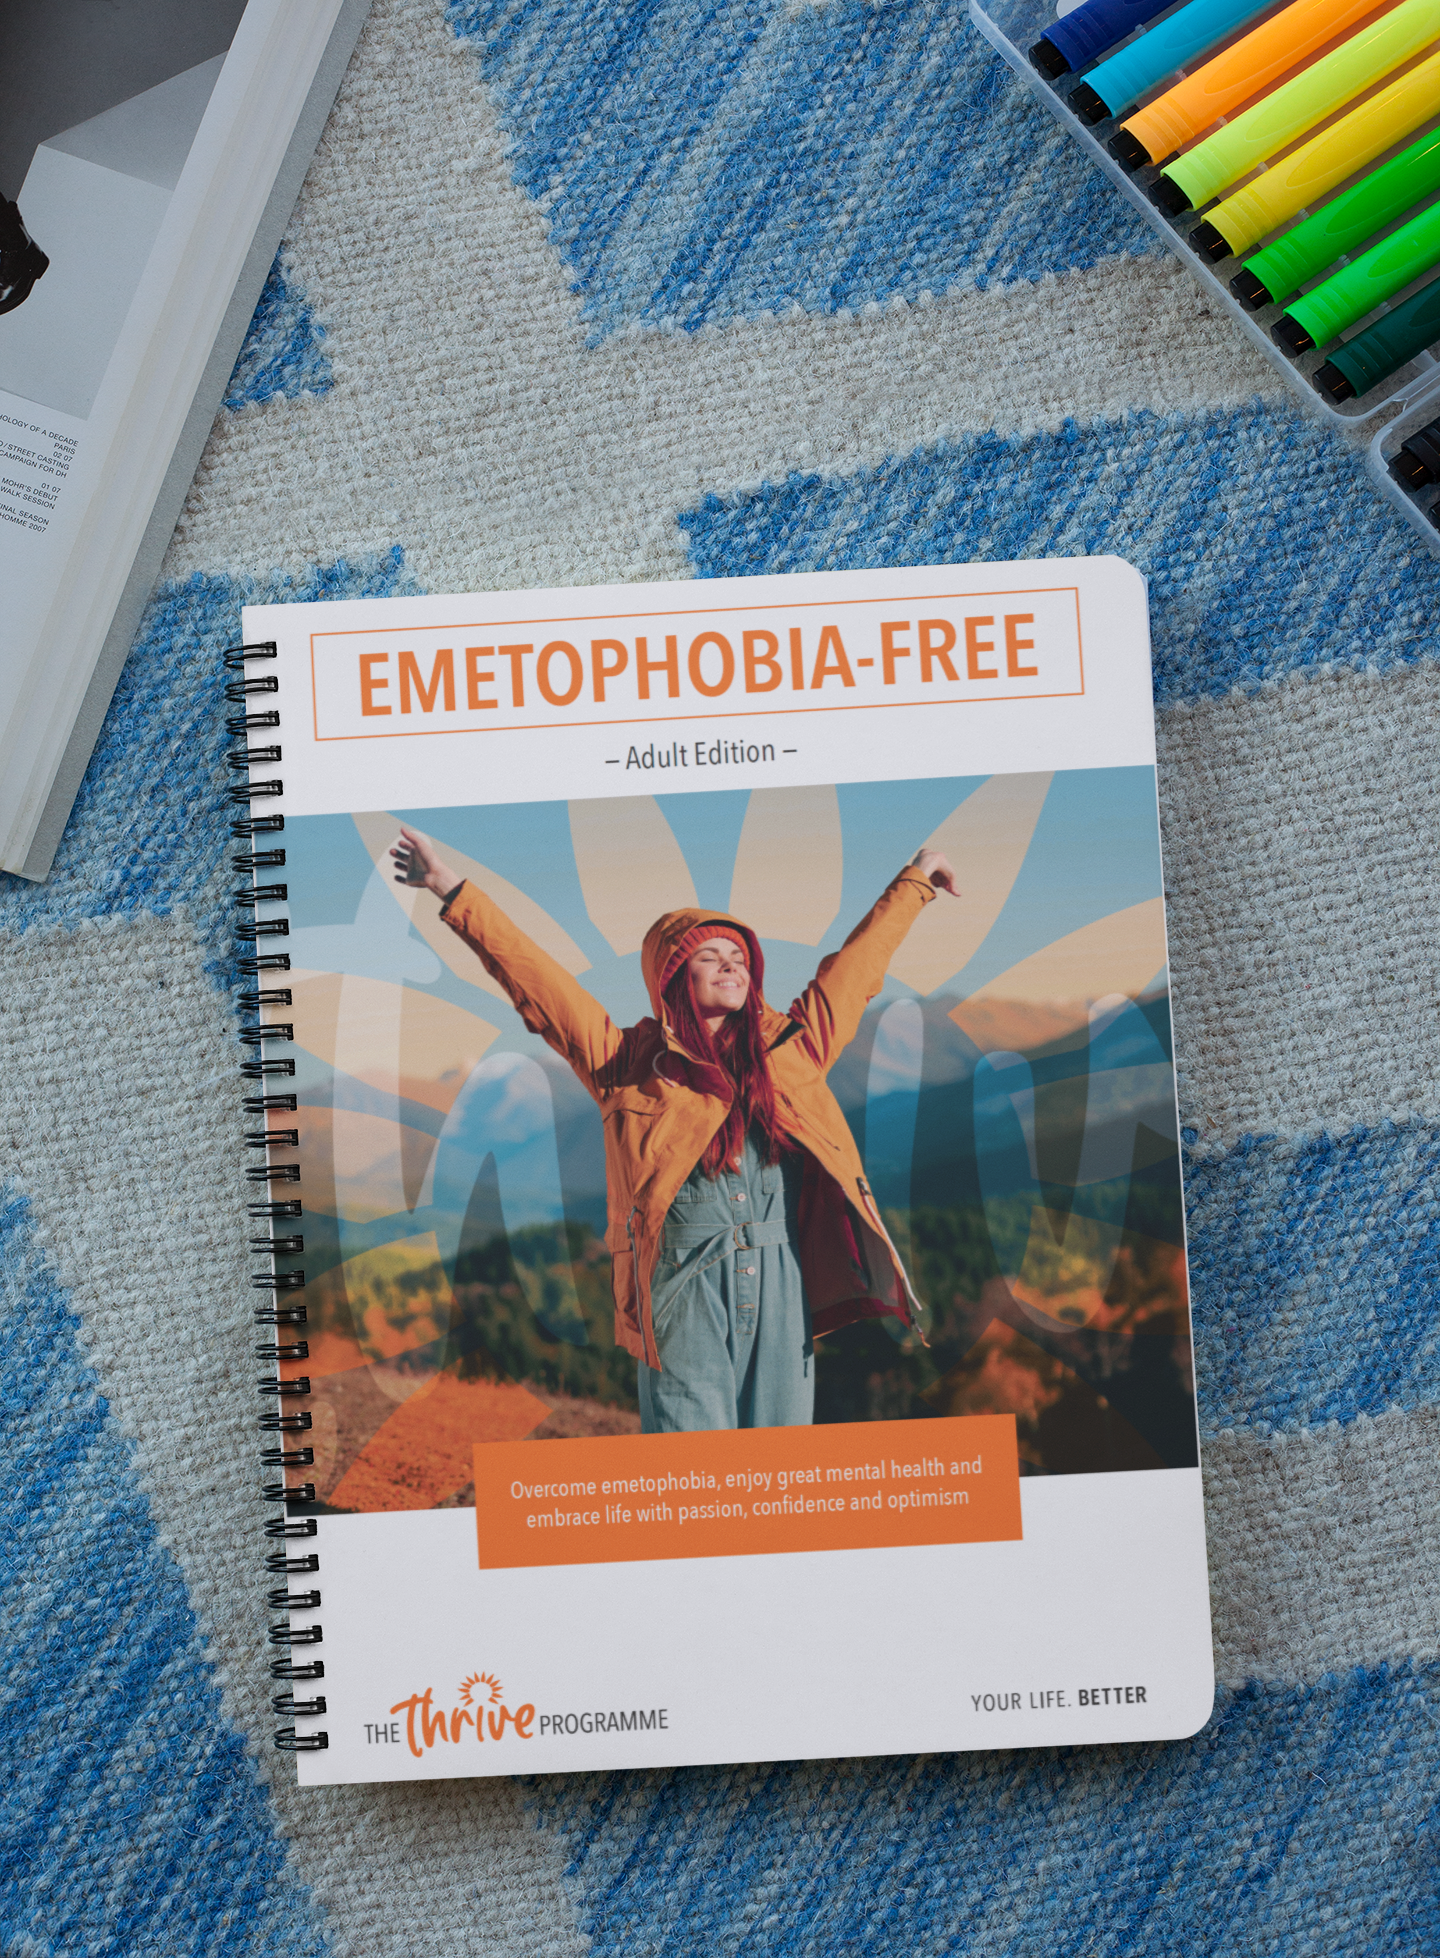 Programme　Thrive　Shop　Manual　The　Support　(16+)　Adults　–　Emetophobia-Free　Paperback